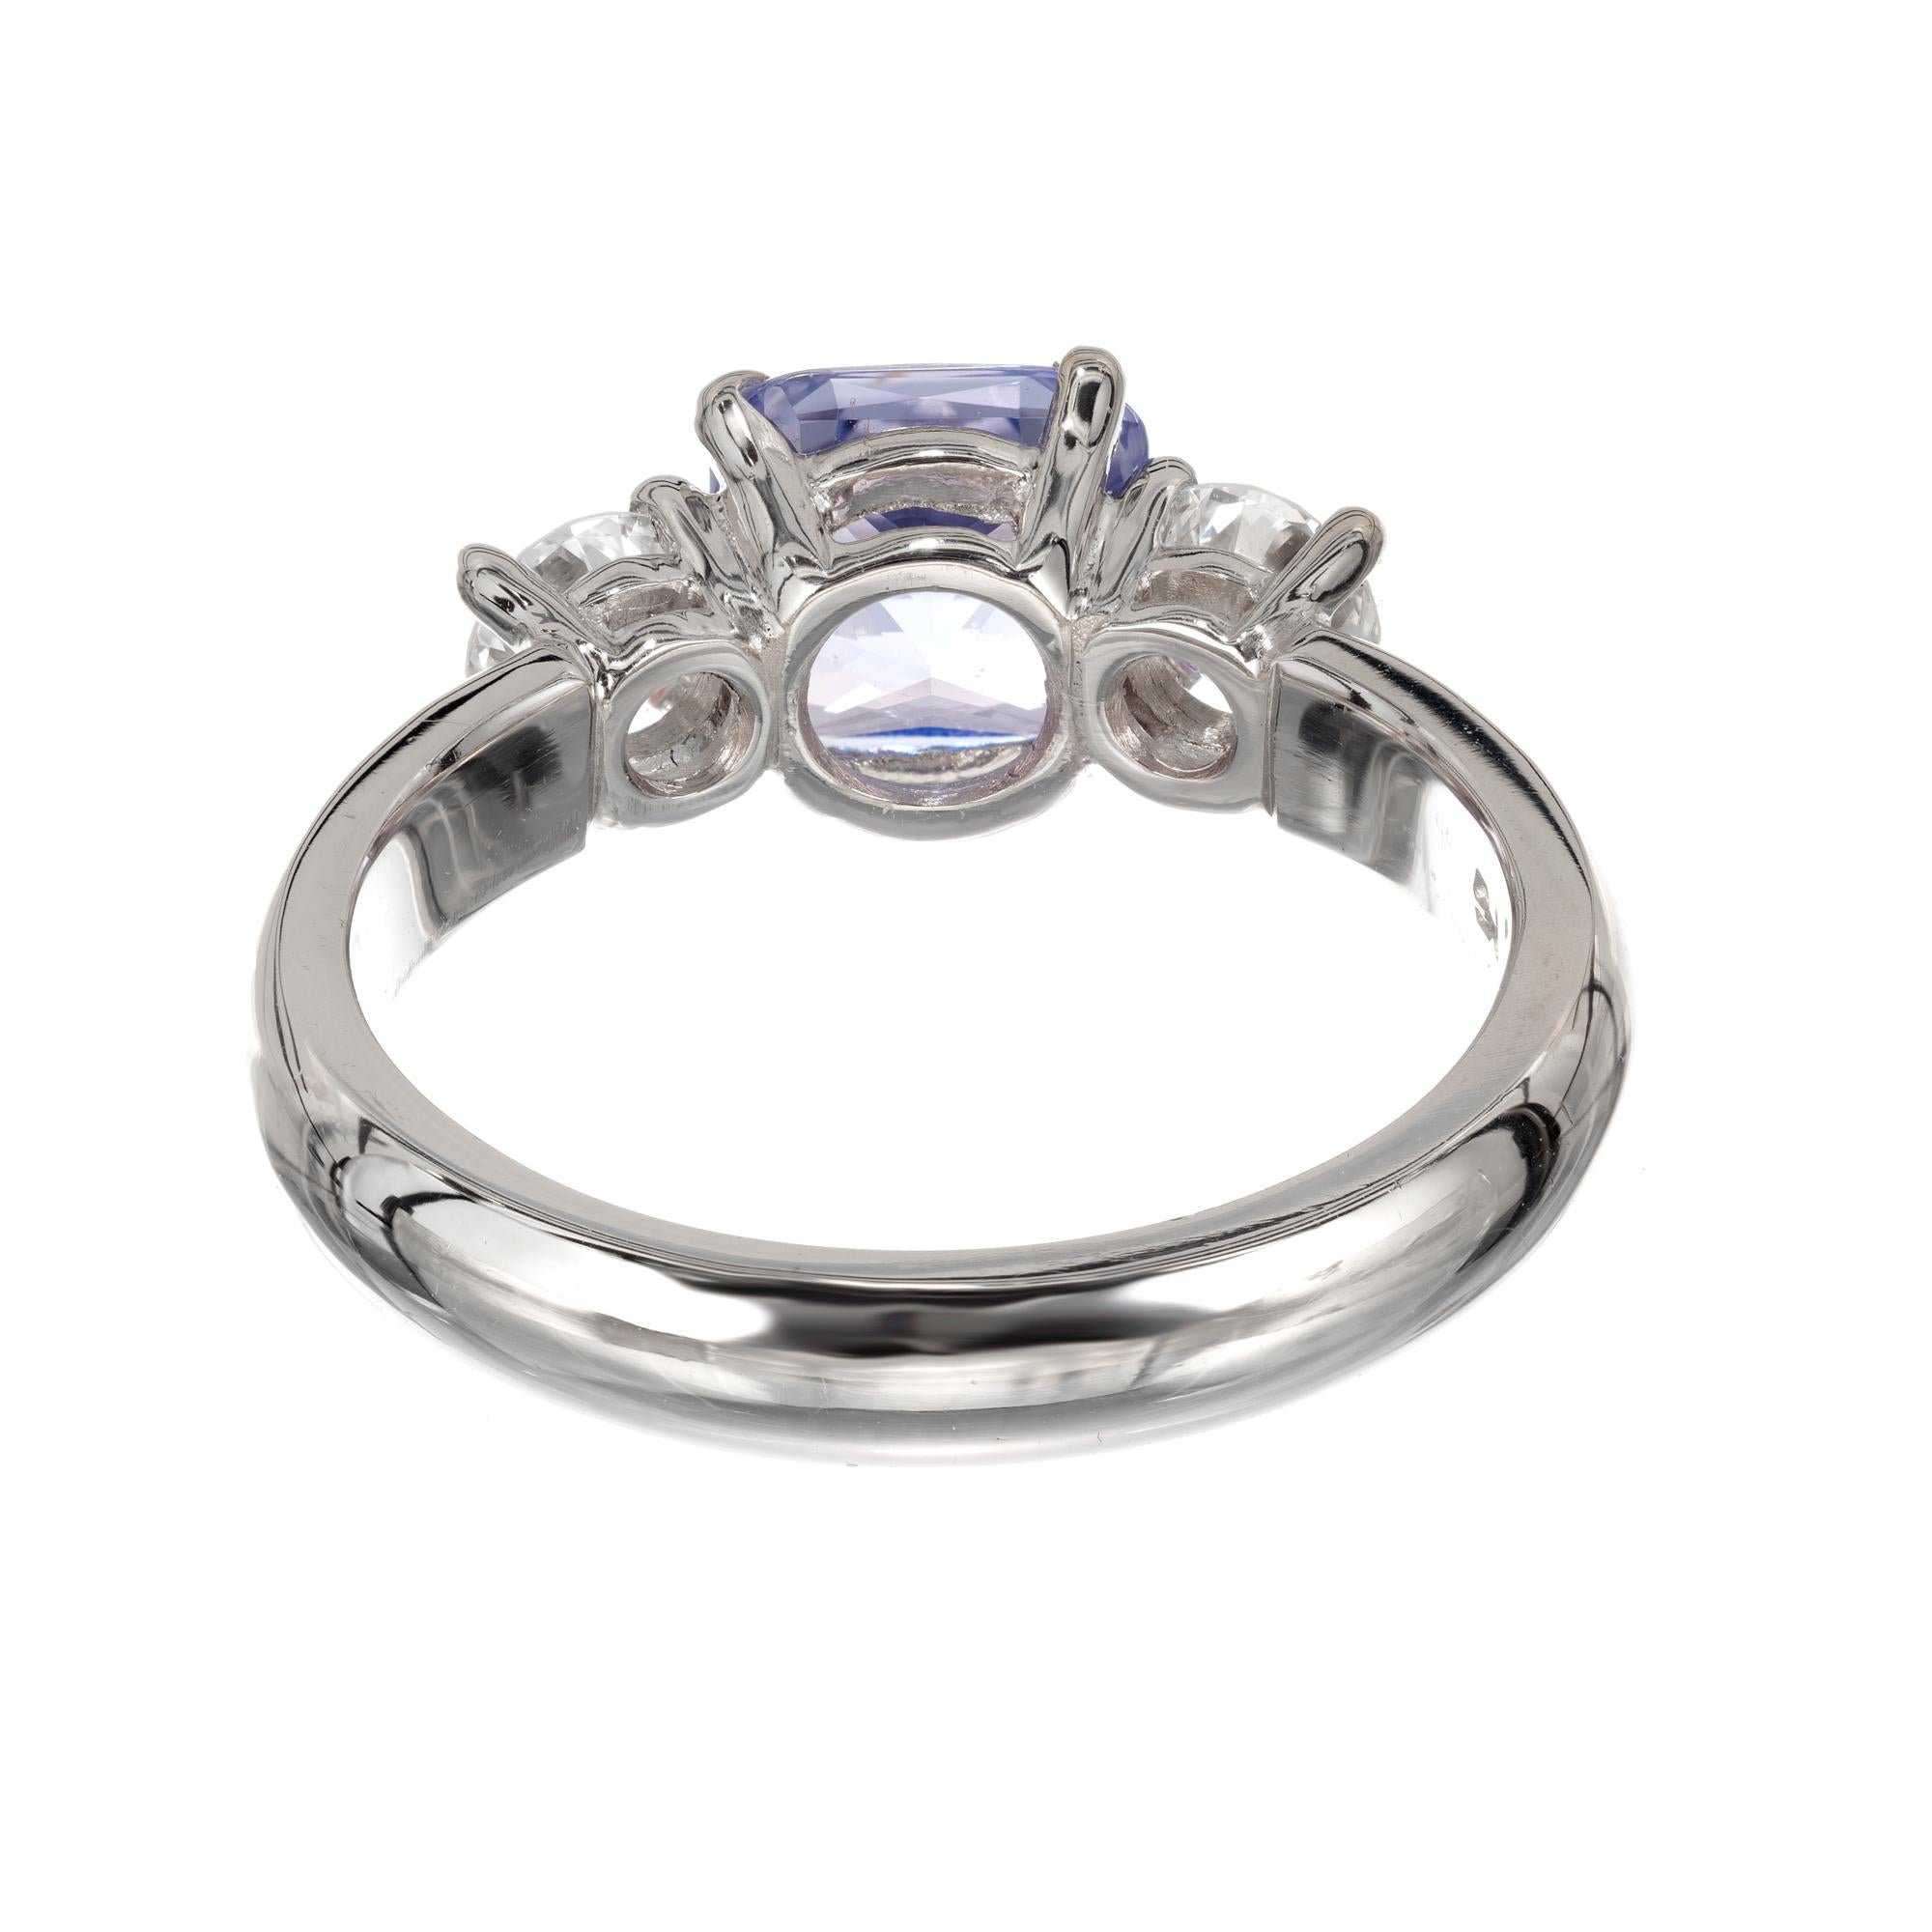 Peter Suchy GIA Certified 1.81 Carat Sapphire Diamond Platinum Engagement Ring In New Condition For Sale In Stamford, CT